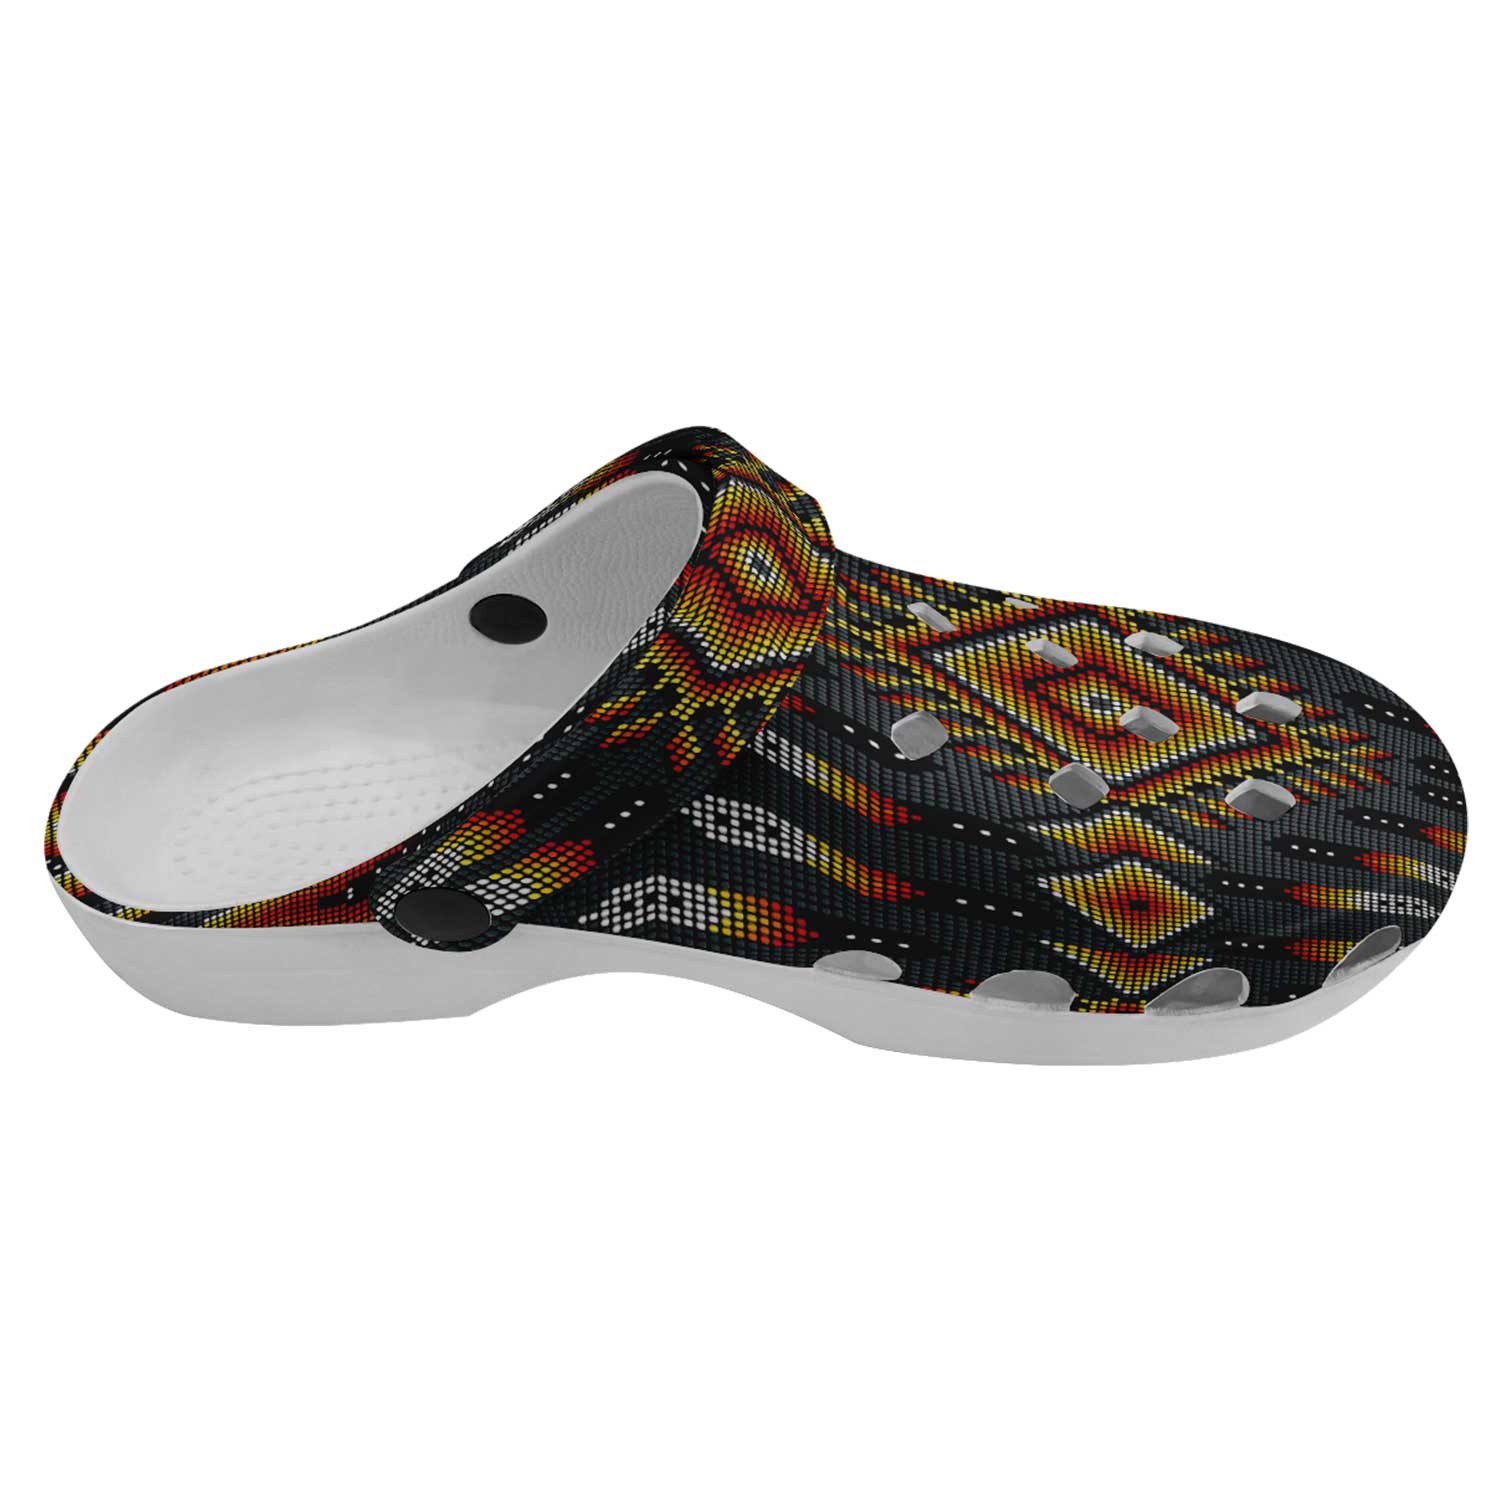 Fire Feather Grey Muddies Unisex Clog Shoes